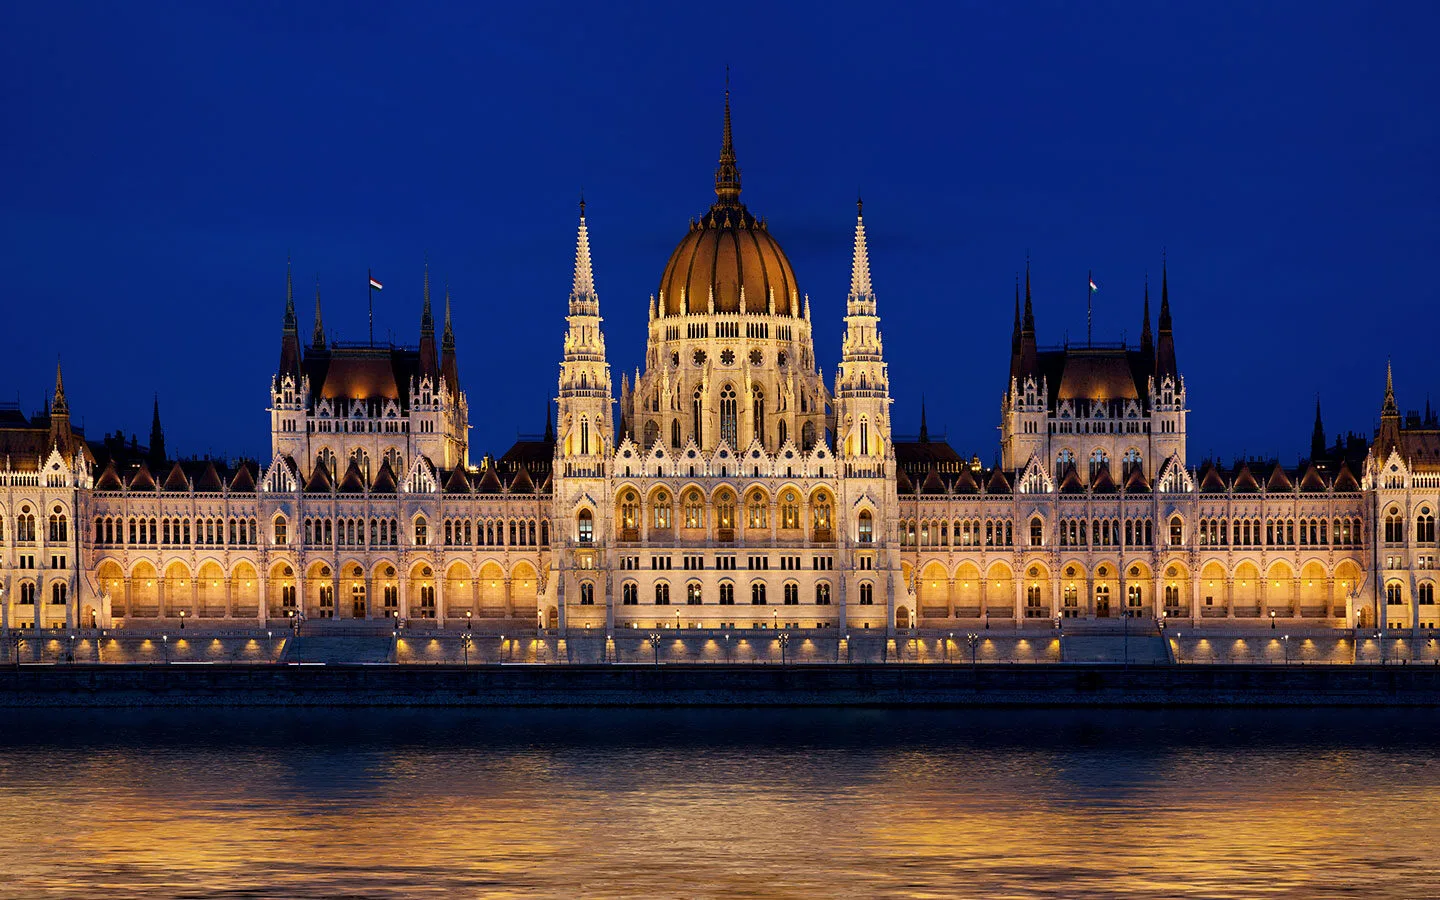 The Hungarian Parliament at night in Budapest